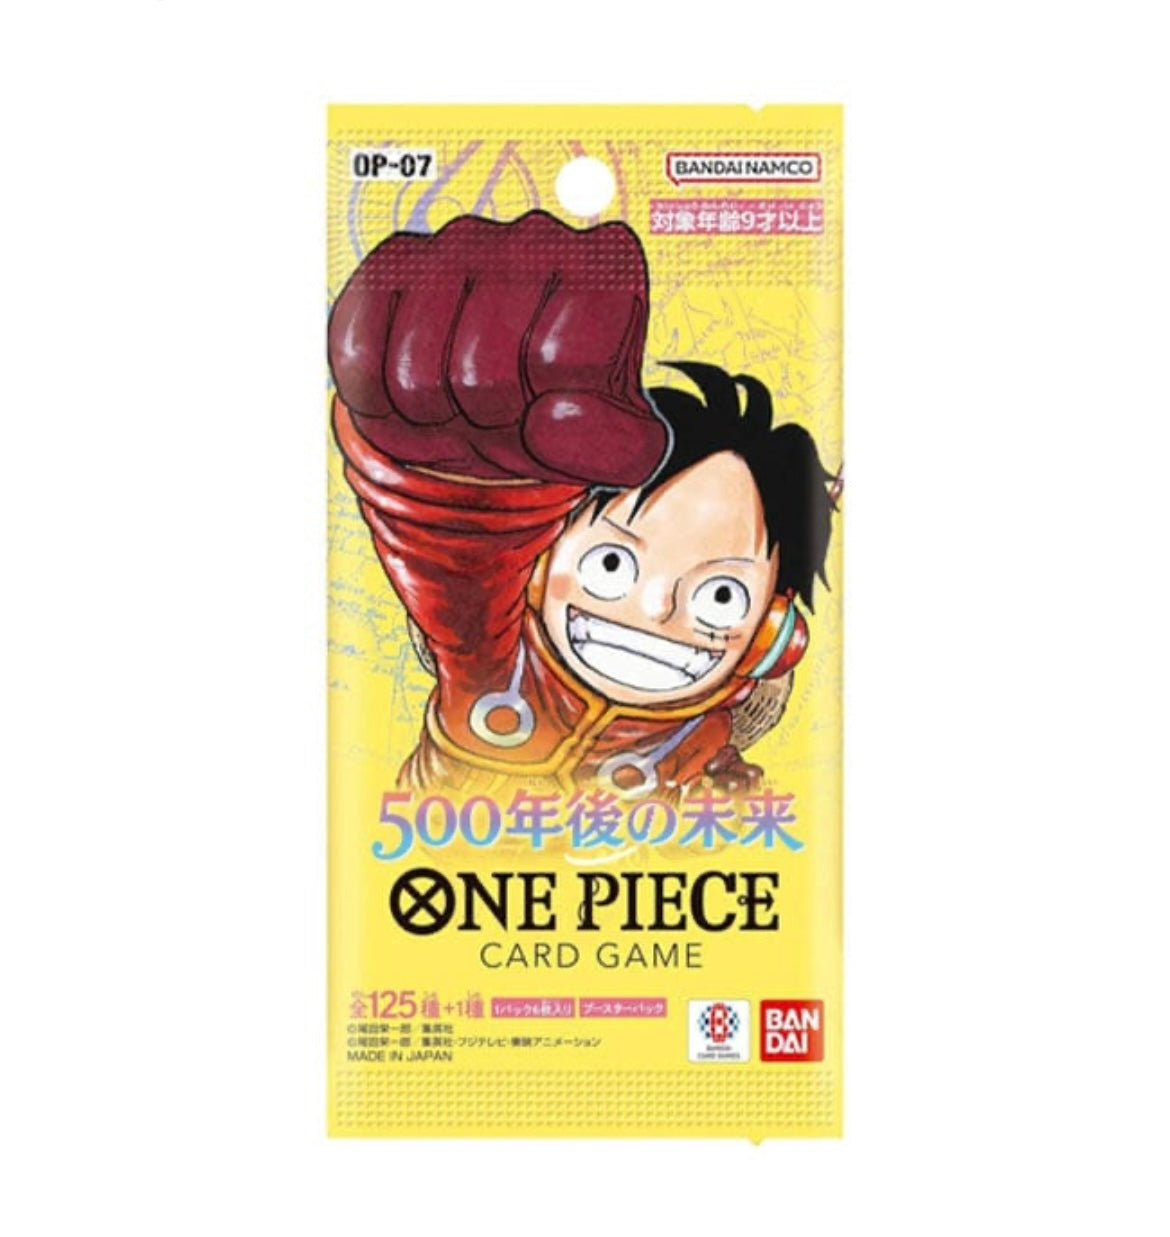 One Piece Trading Card Game Op-07 500 Years into the Future Japanese Booster Pack